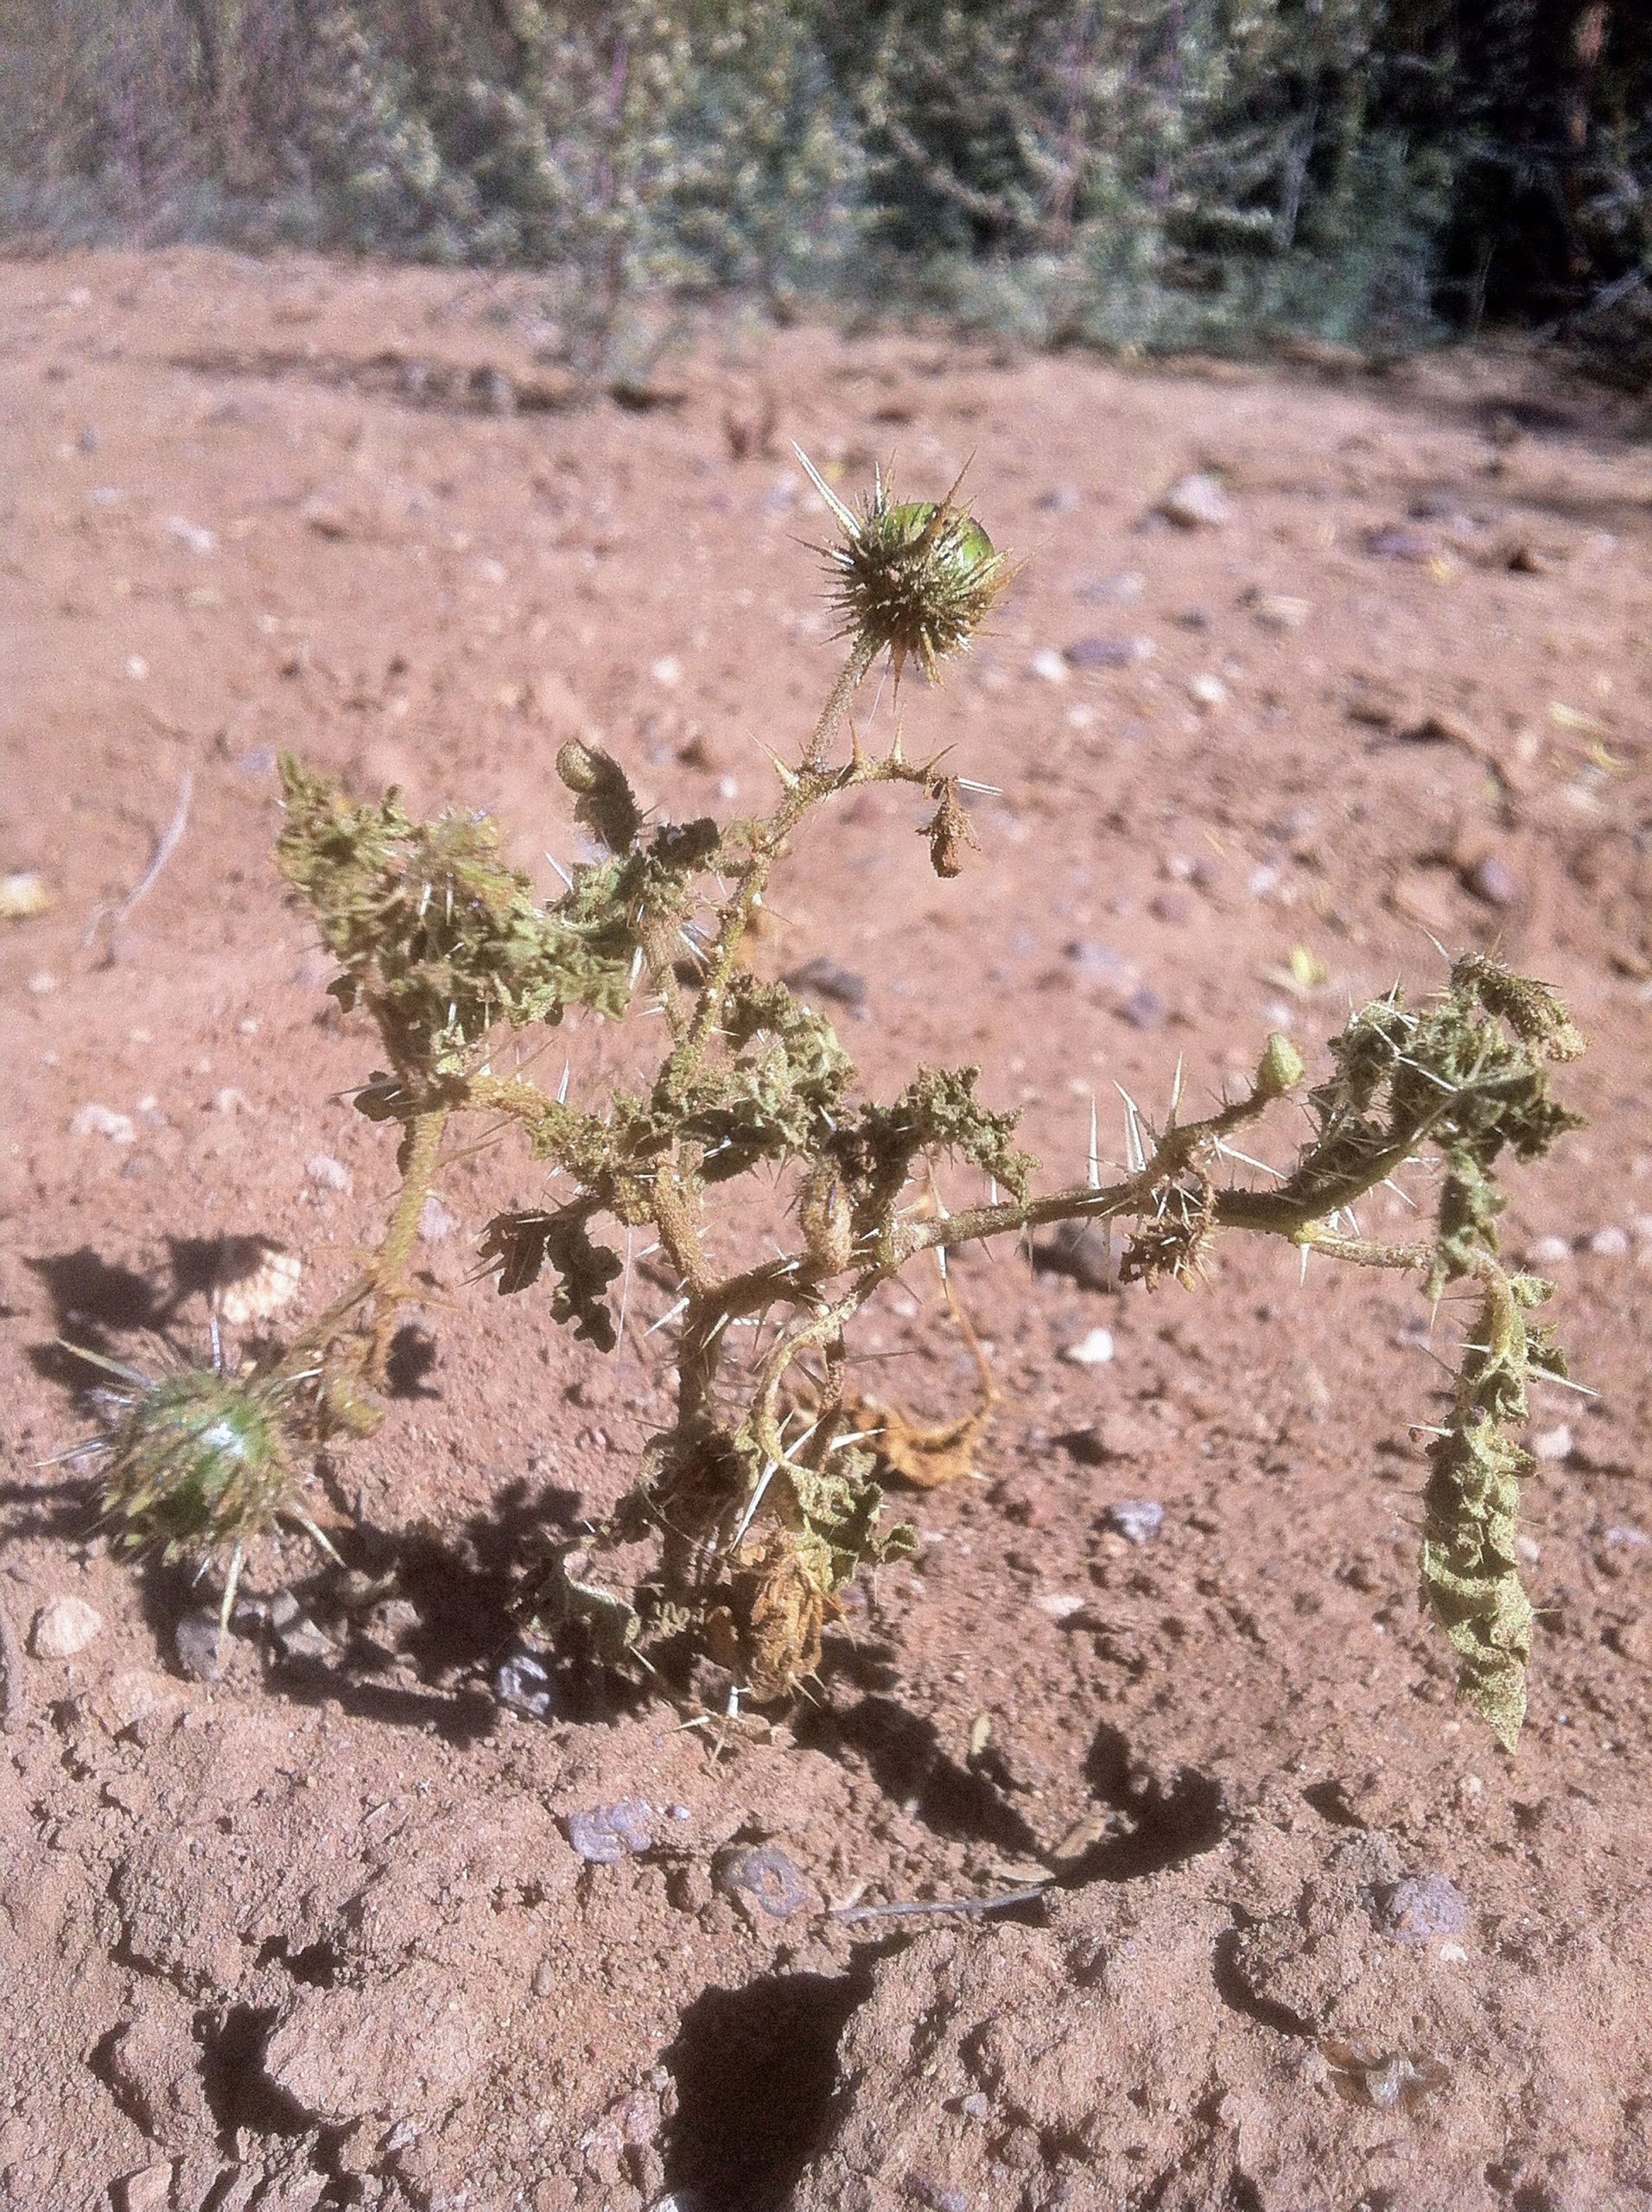 This spiny and wilted plant – shown here where it was found in Valentine, Texas in November 2013 – is only the third specimen of Solanum cordicitum ever found. The first specimen was found in 1974 and the second in 1990, but over the years, the plant was wrongly assigned to three different Solanum species before a study led by University of Utah botanist Lynn Bohs identified it as an entirely new but likely endangered species. Solanum is among the largest genera of flowering plants, and includes tomatoes, potatoes, chili peppers and eggplants.